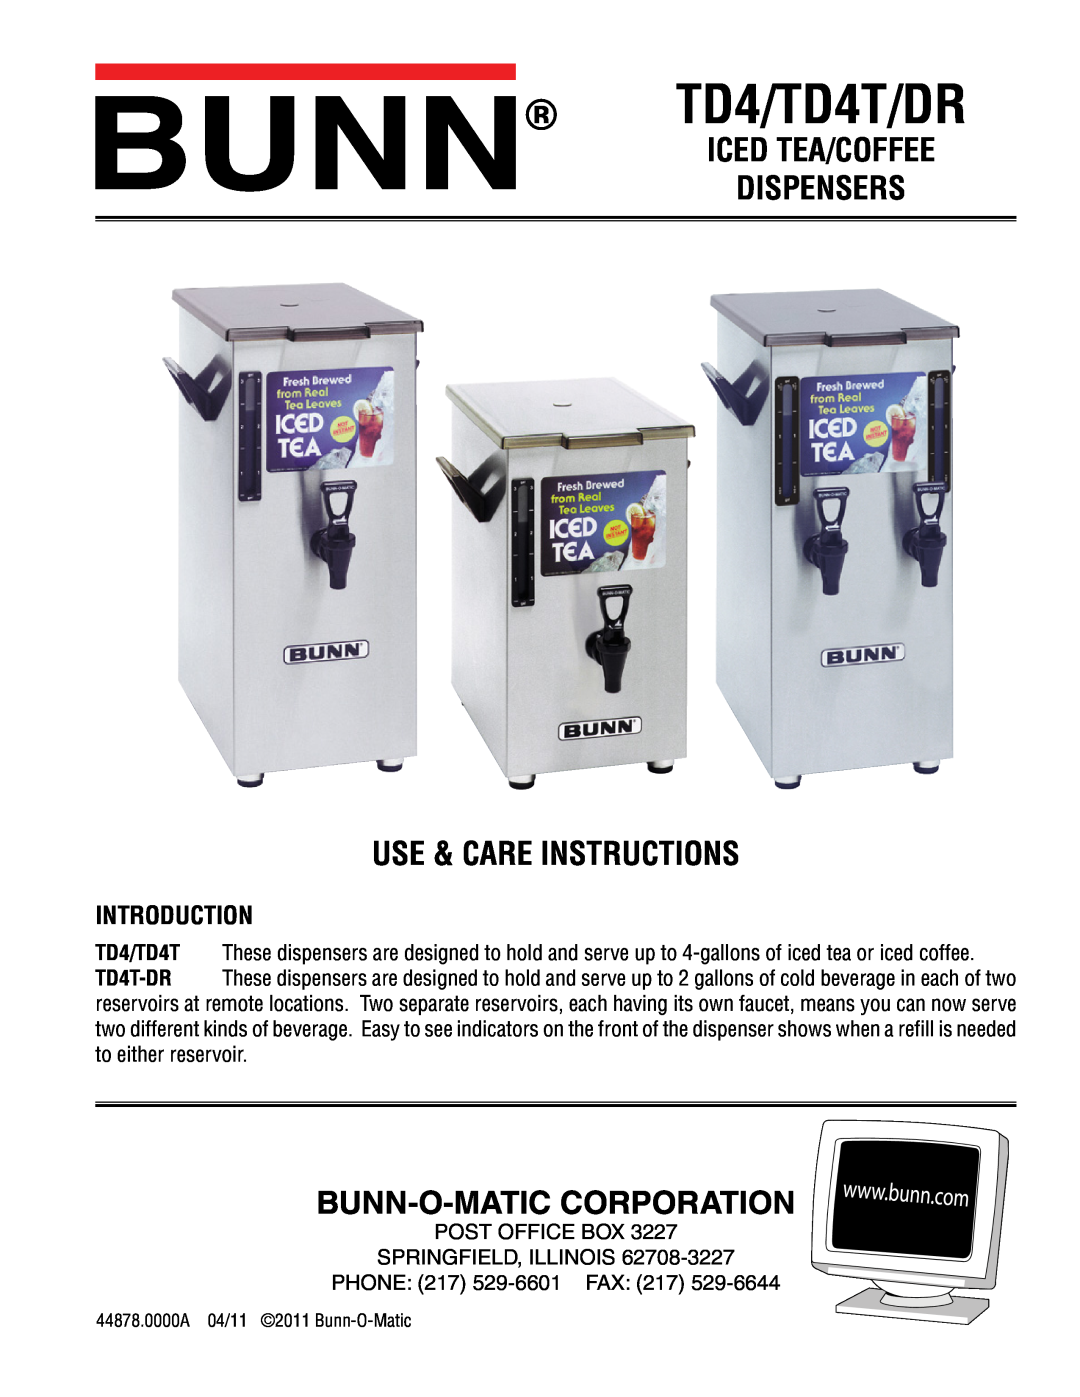 Bunn TD4T-DR manual Introduction, TD4/TD4T/DR, Iced Tea/Coffee Dispensers Use & Care Instructions 